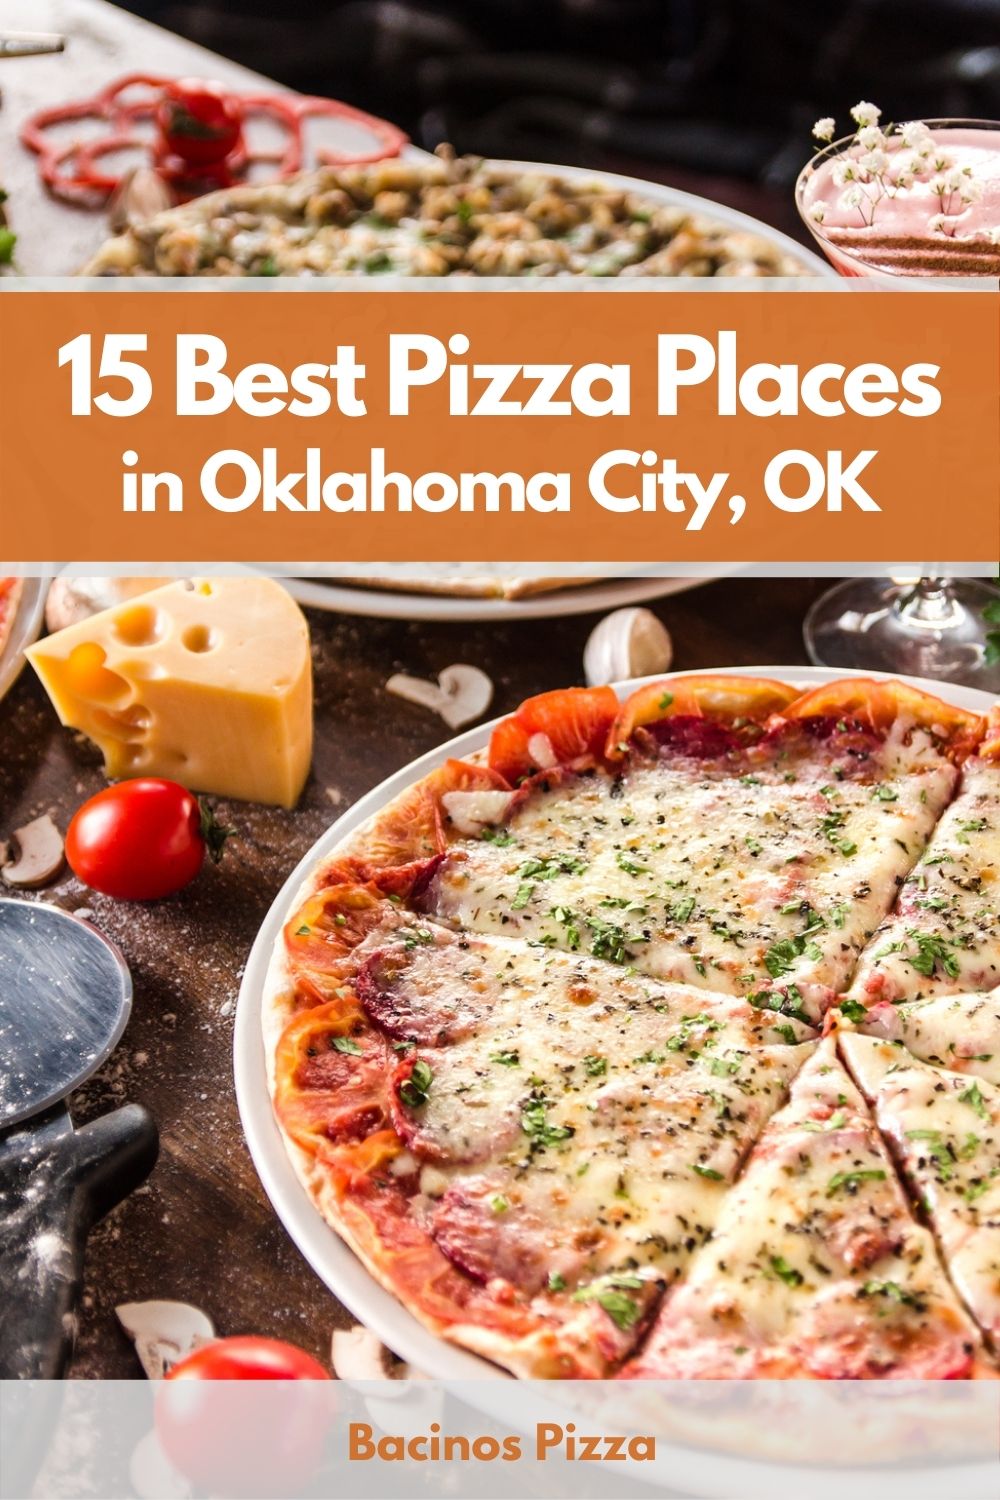 15 Best Pizza Places in Oklahoma City, OK pin 2